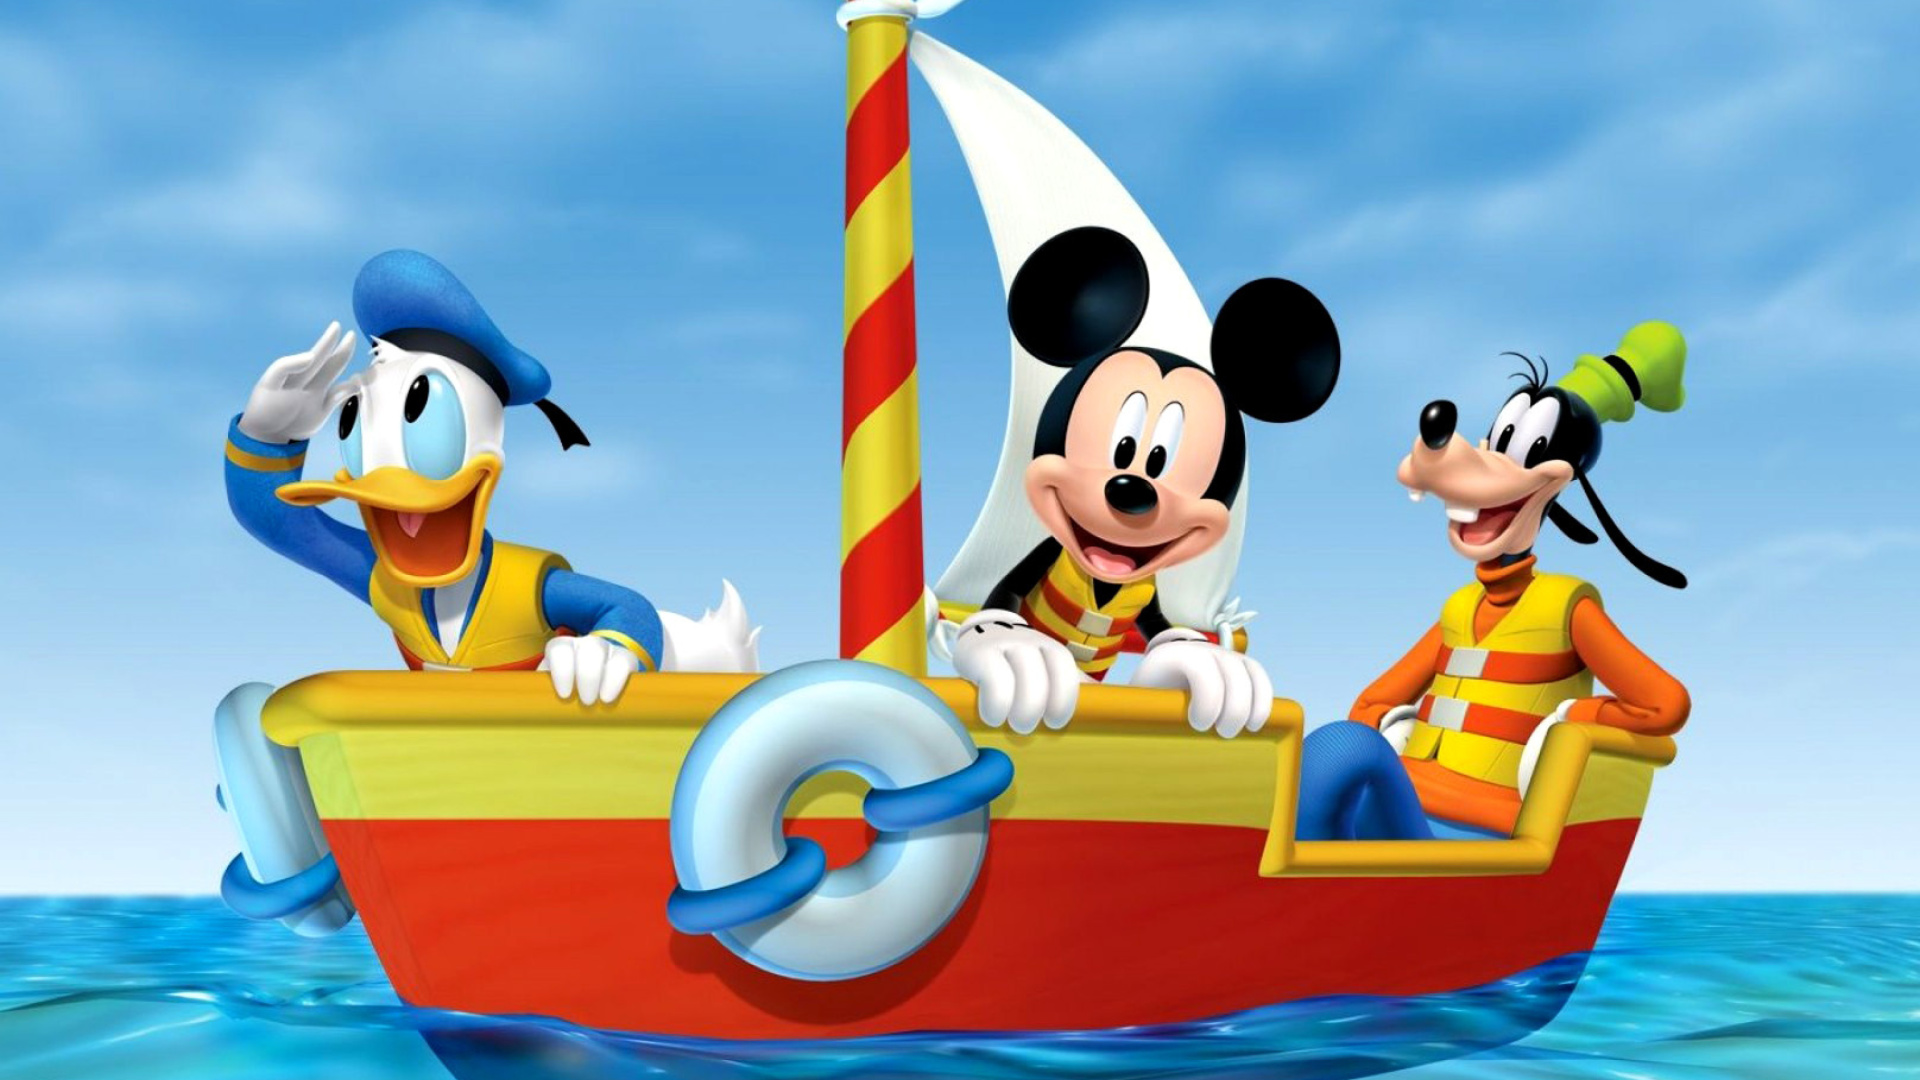 Mickey Mouse Clubhouse Wallpaper for Desktop 1920x1080 Full HD